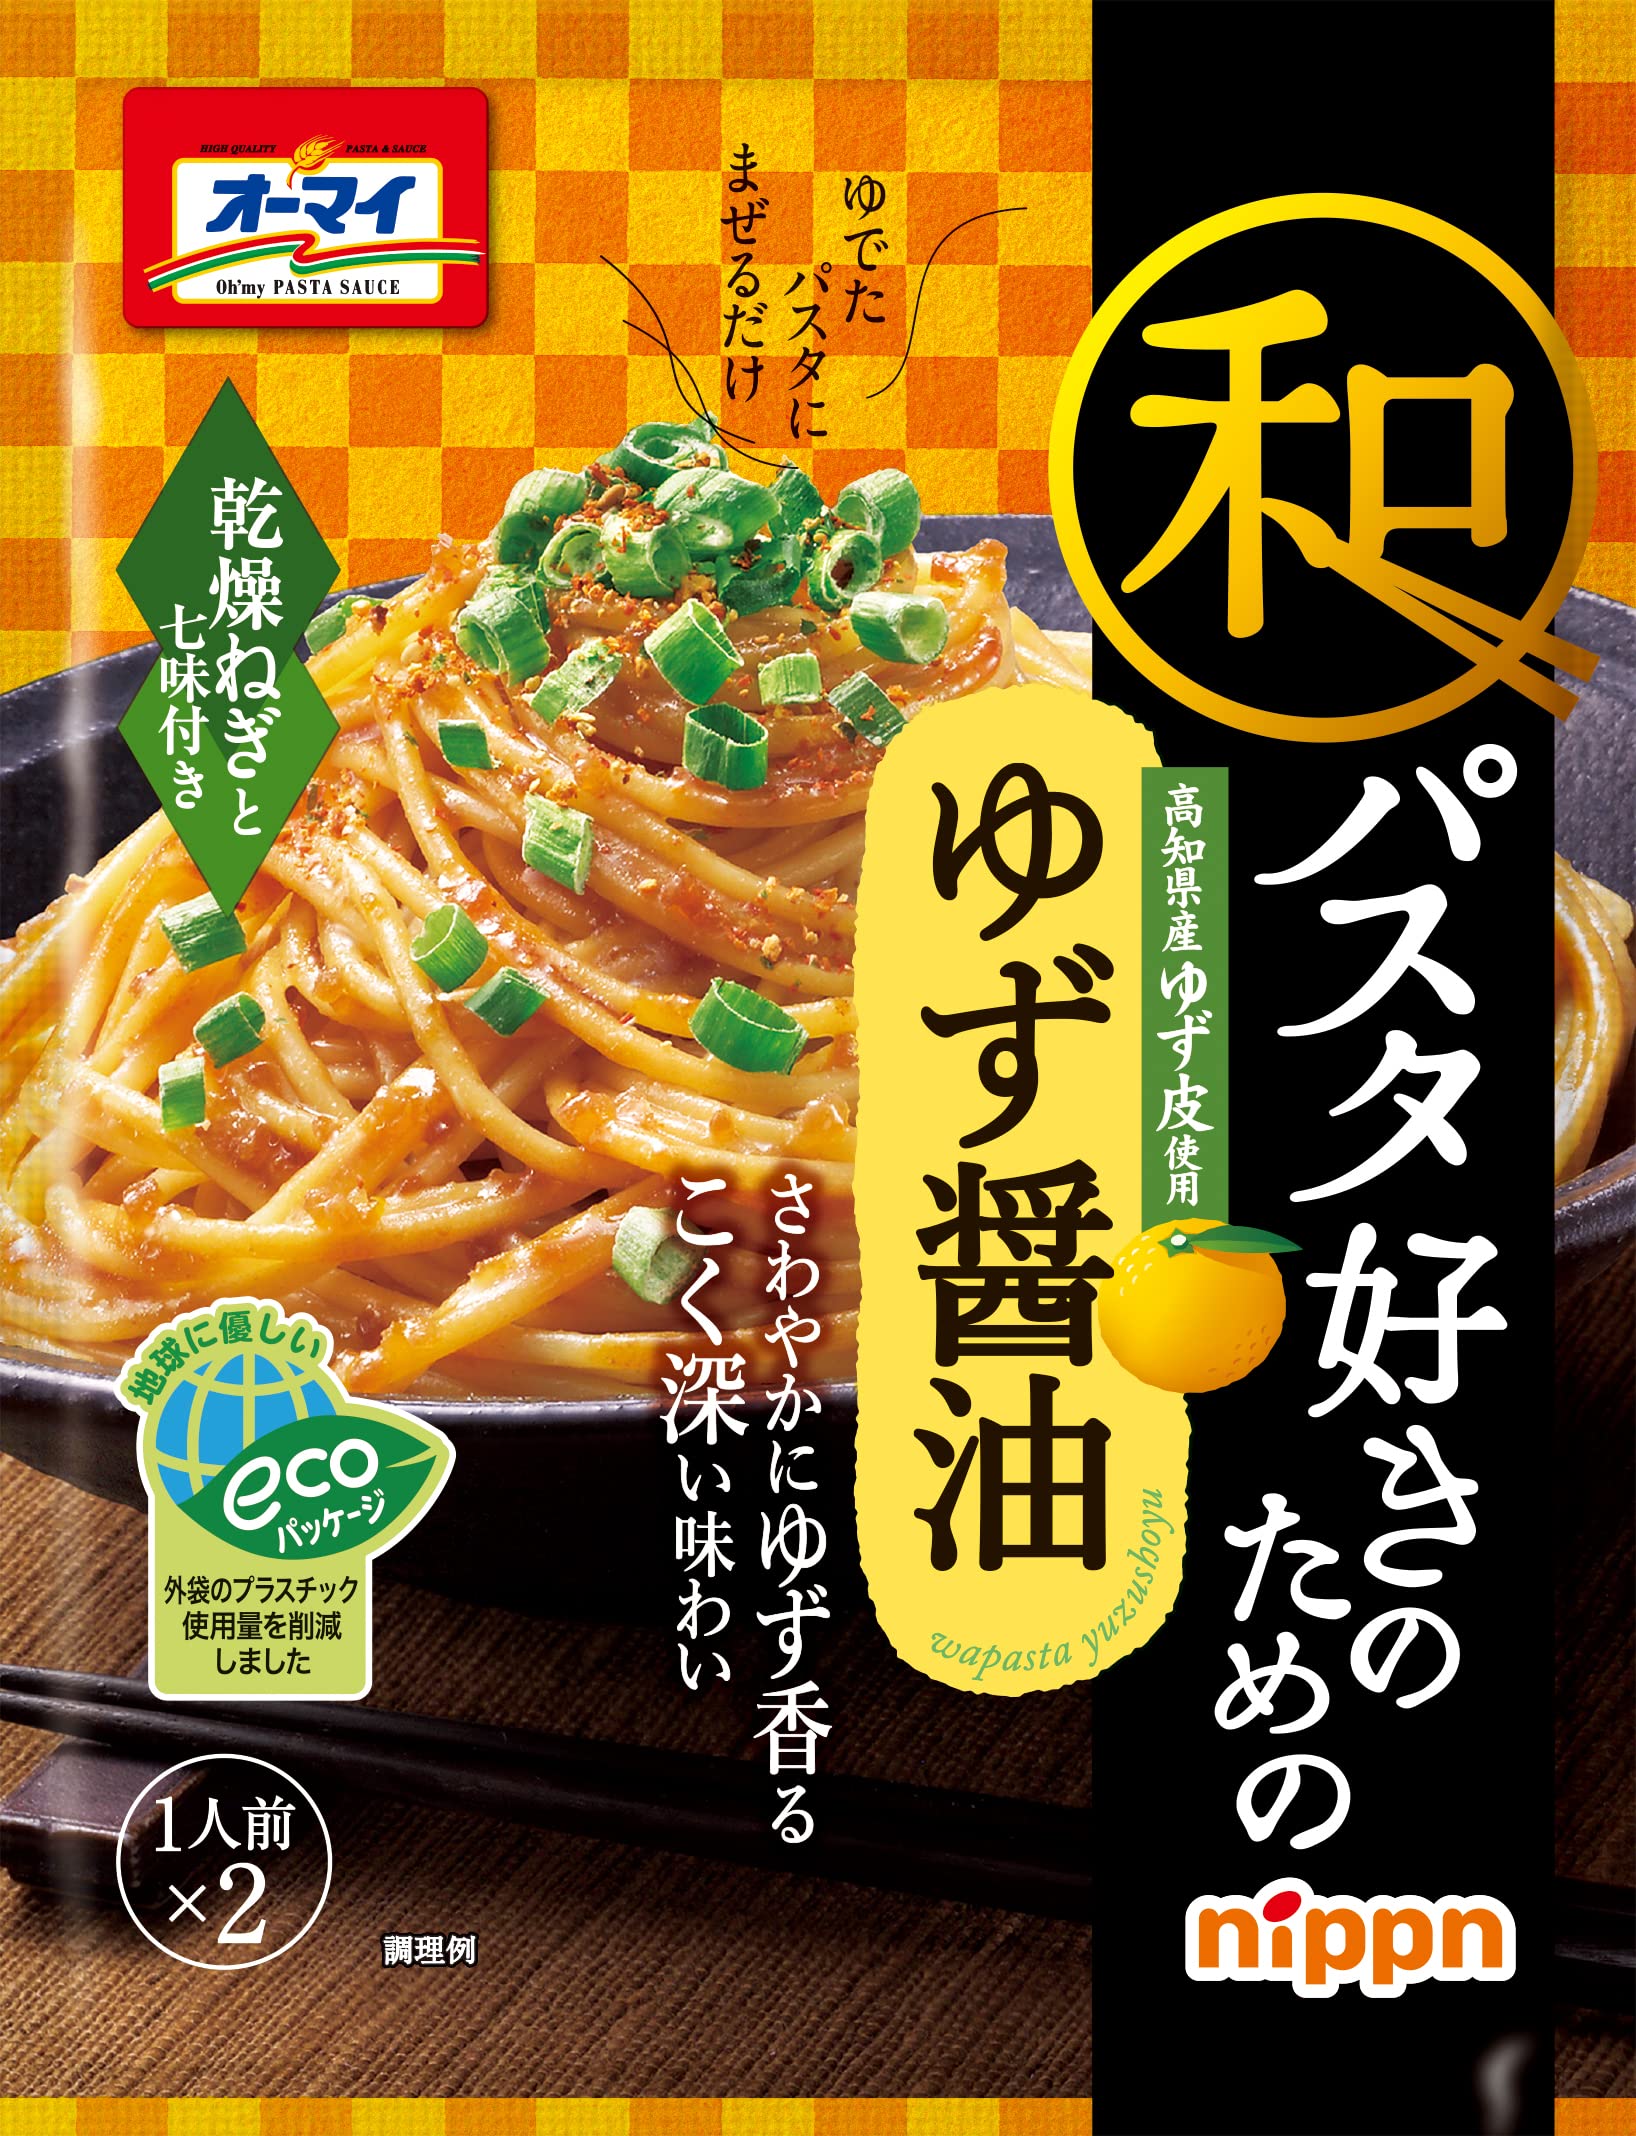 Yuzu soy sauce for lovers Oh my sum pasta (24.7gX2) X4 pieces